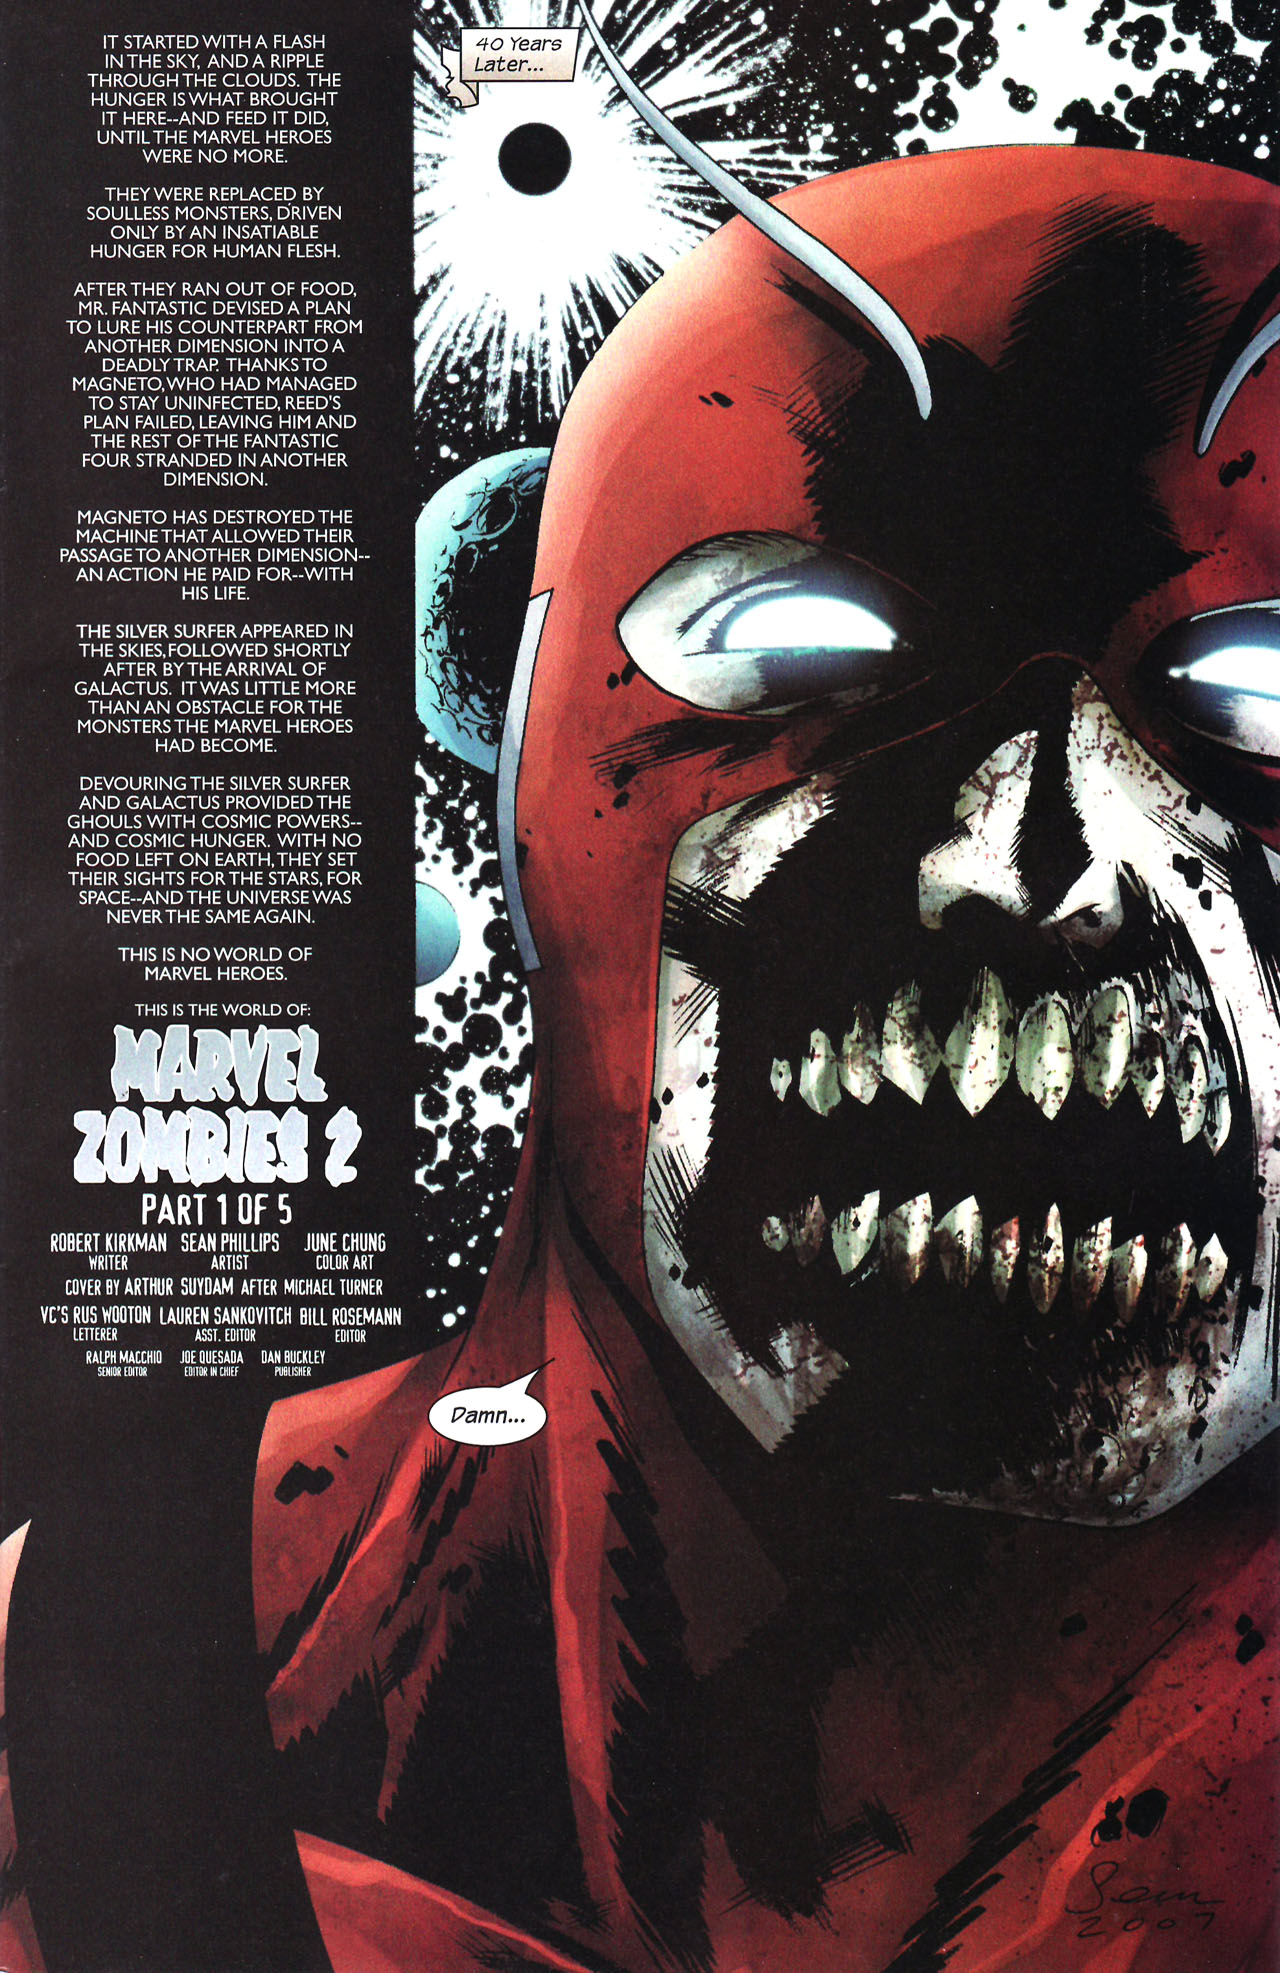 Marvel Zombies 2 - 1 of 5